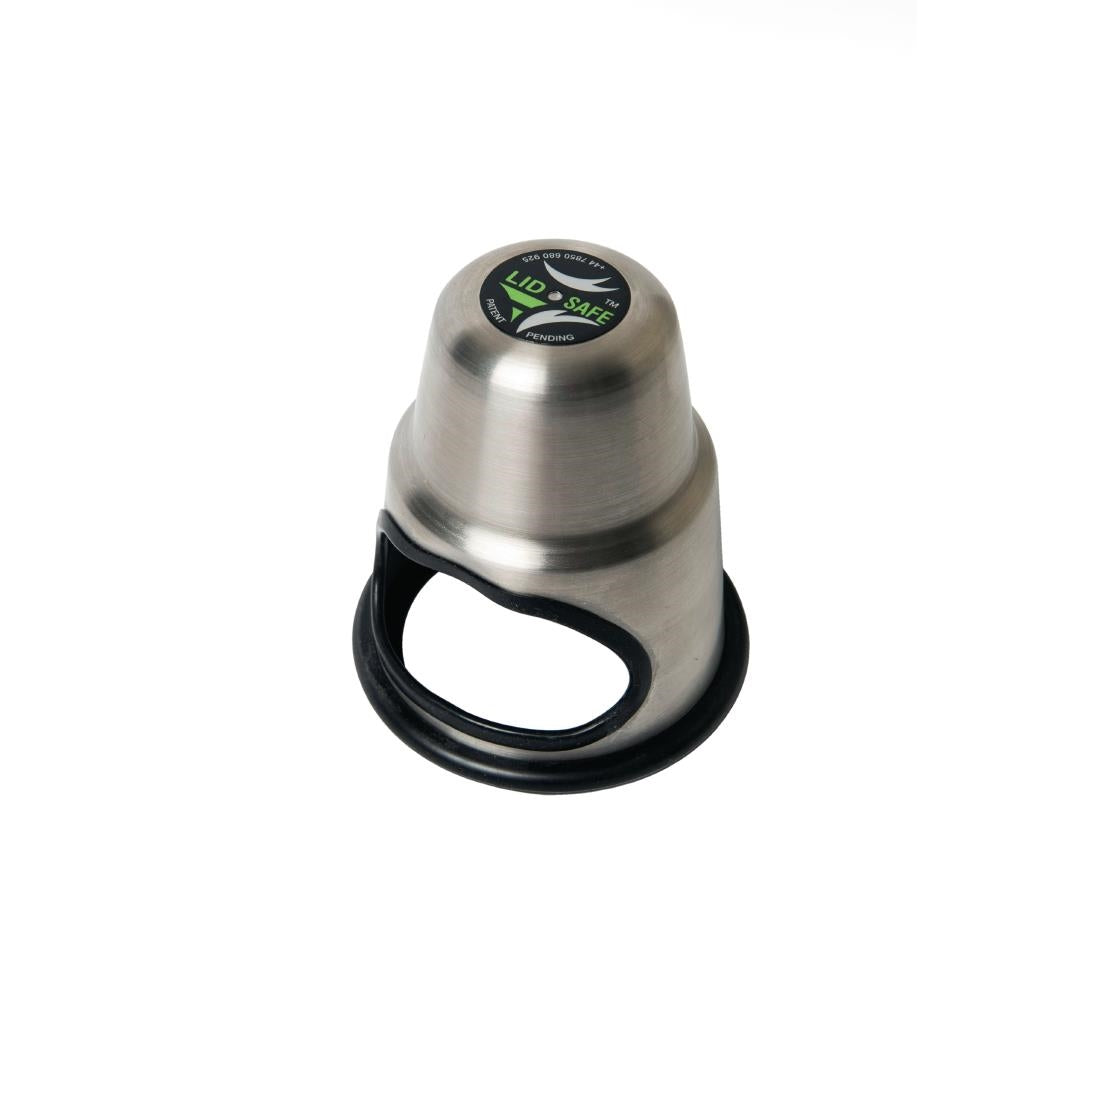 Lid Safe Coffee Cup Lid Applicator JD Catering Equipment Solutions Ltd